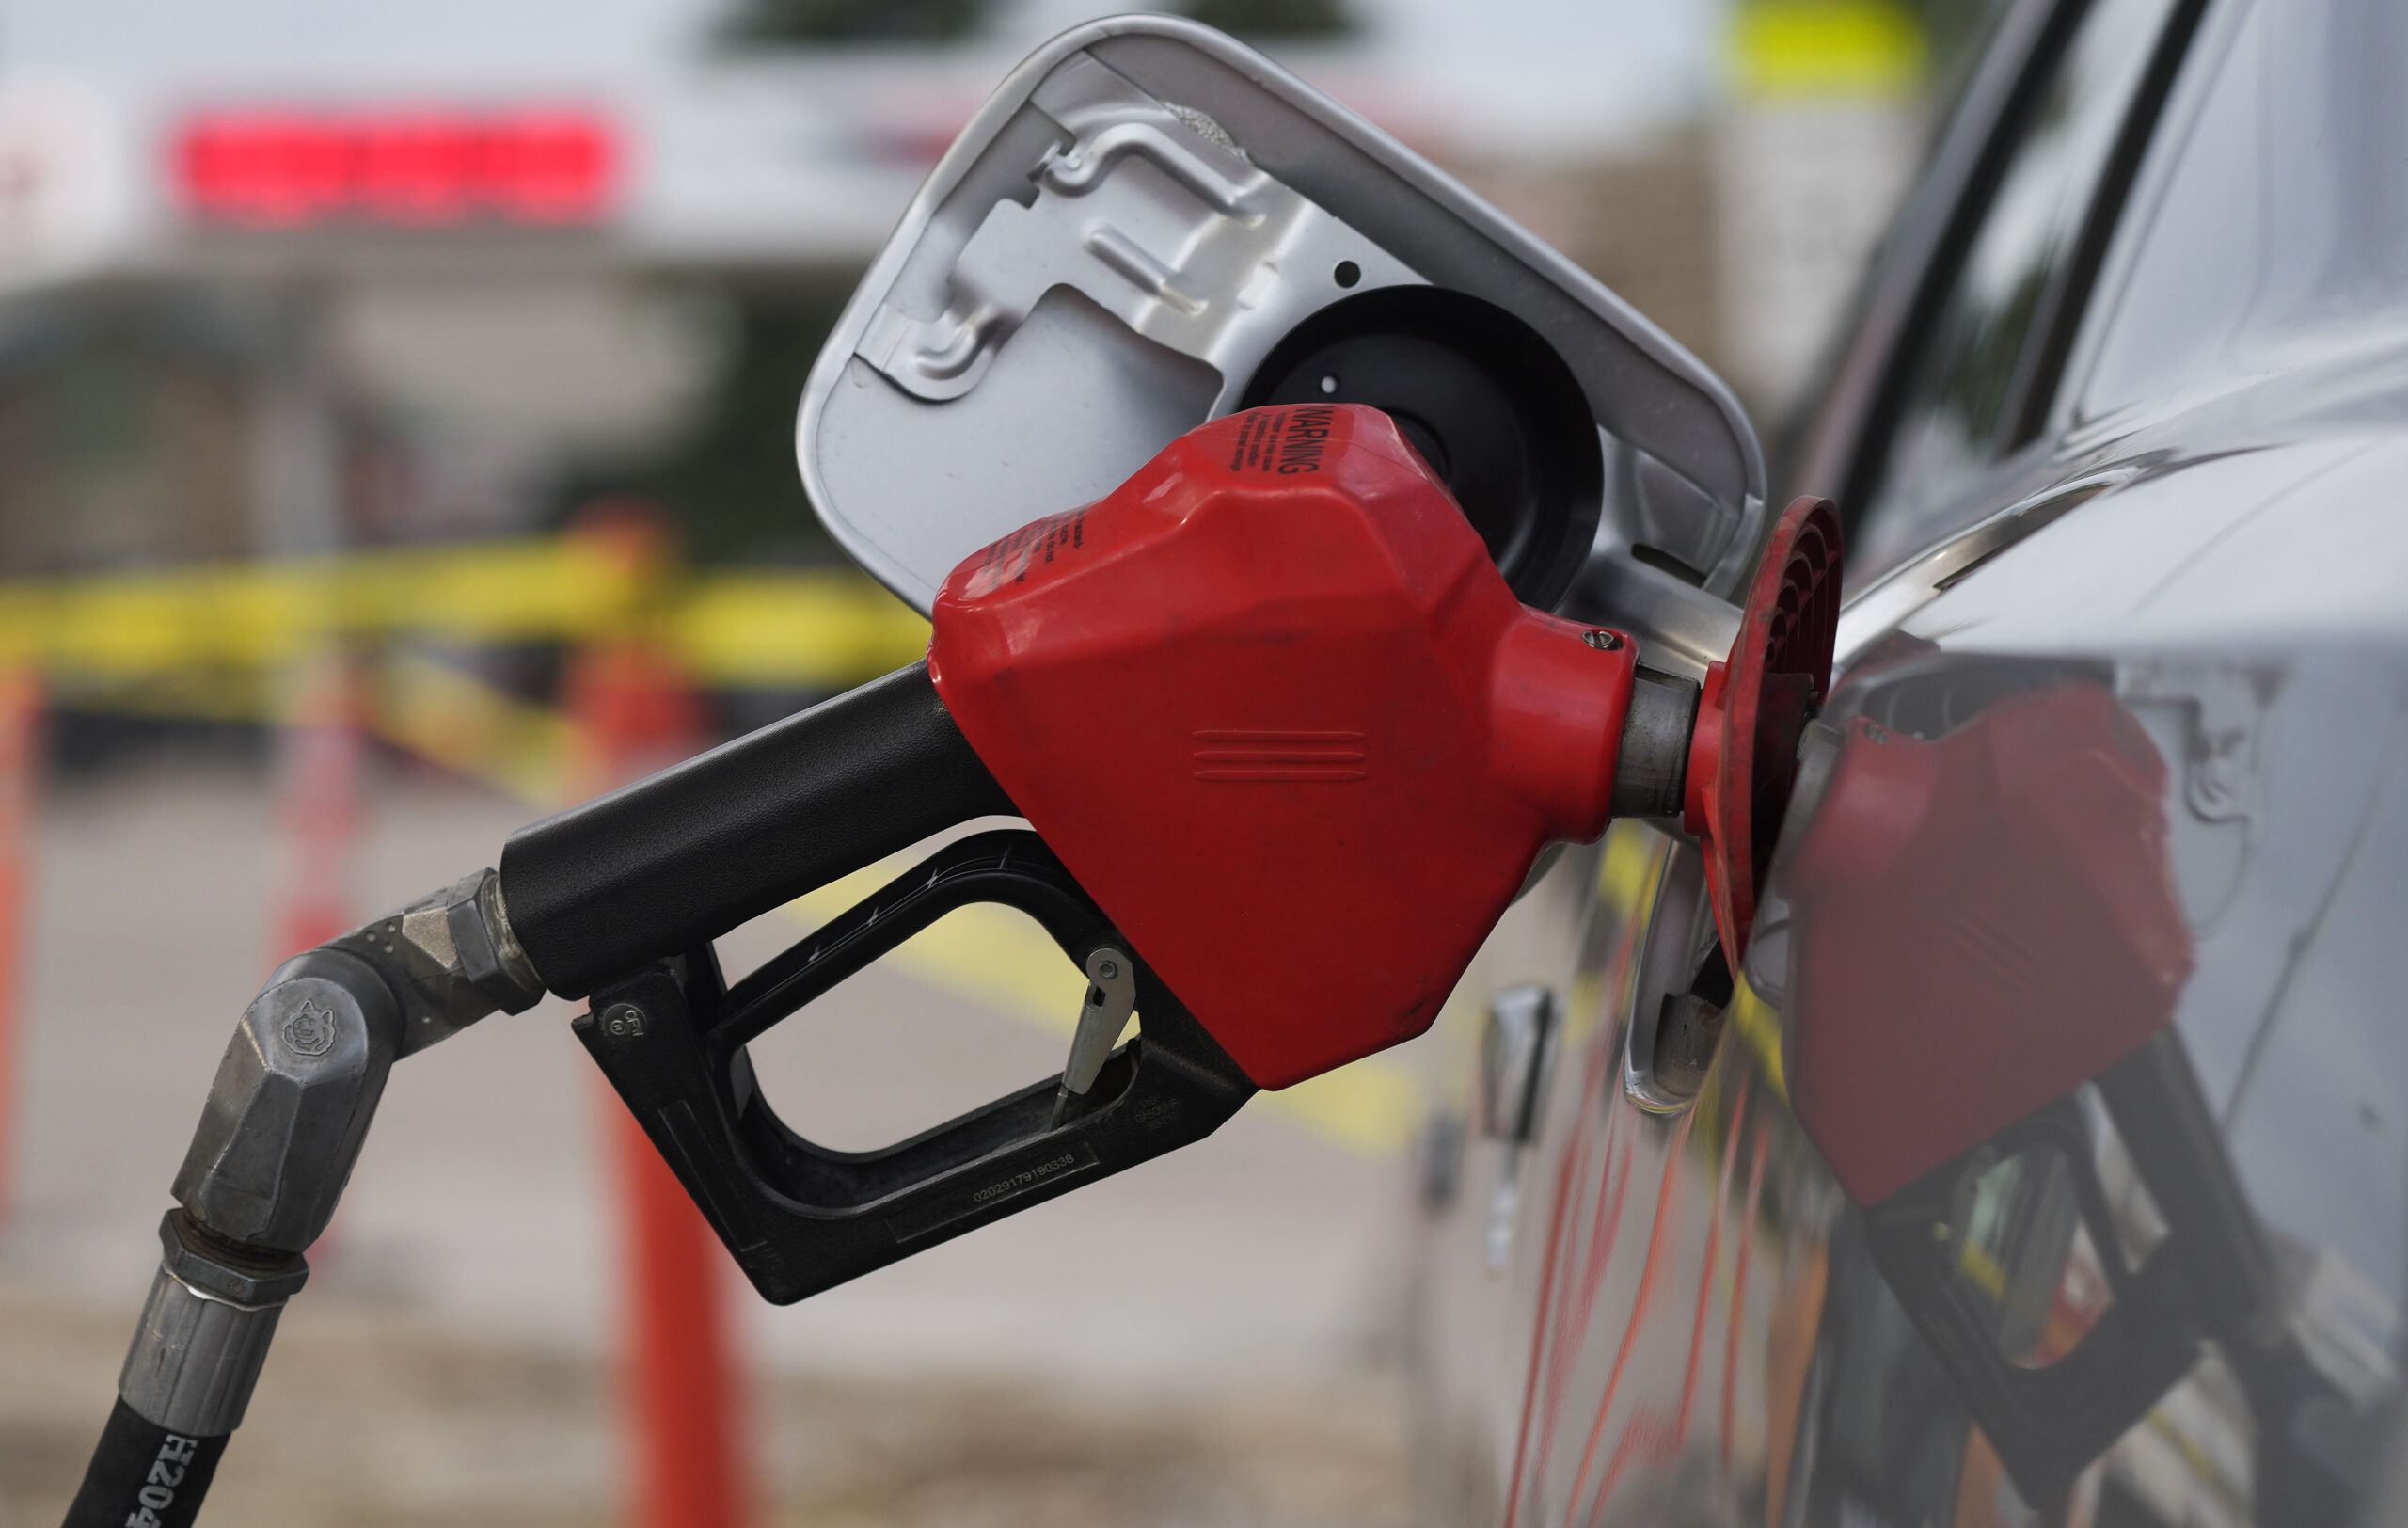 Petrol price drops further, LPG up